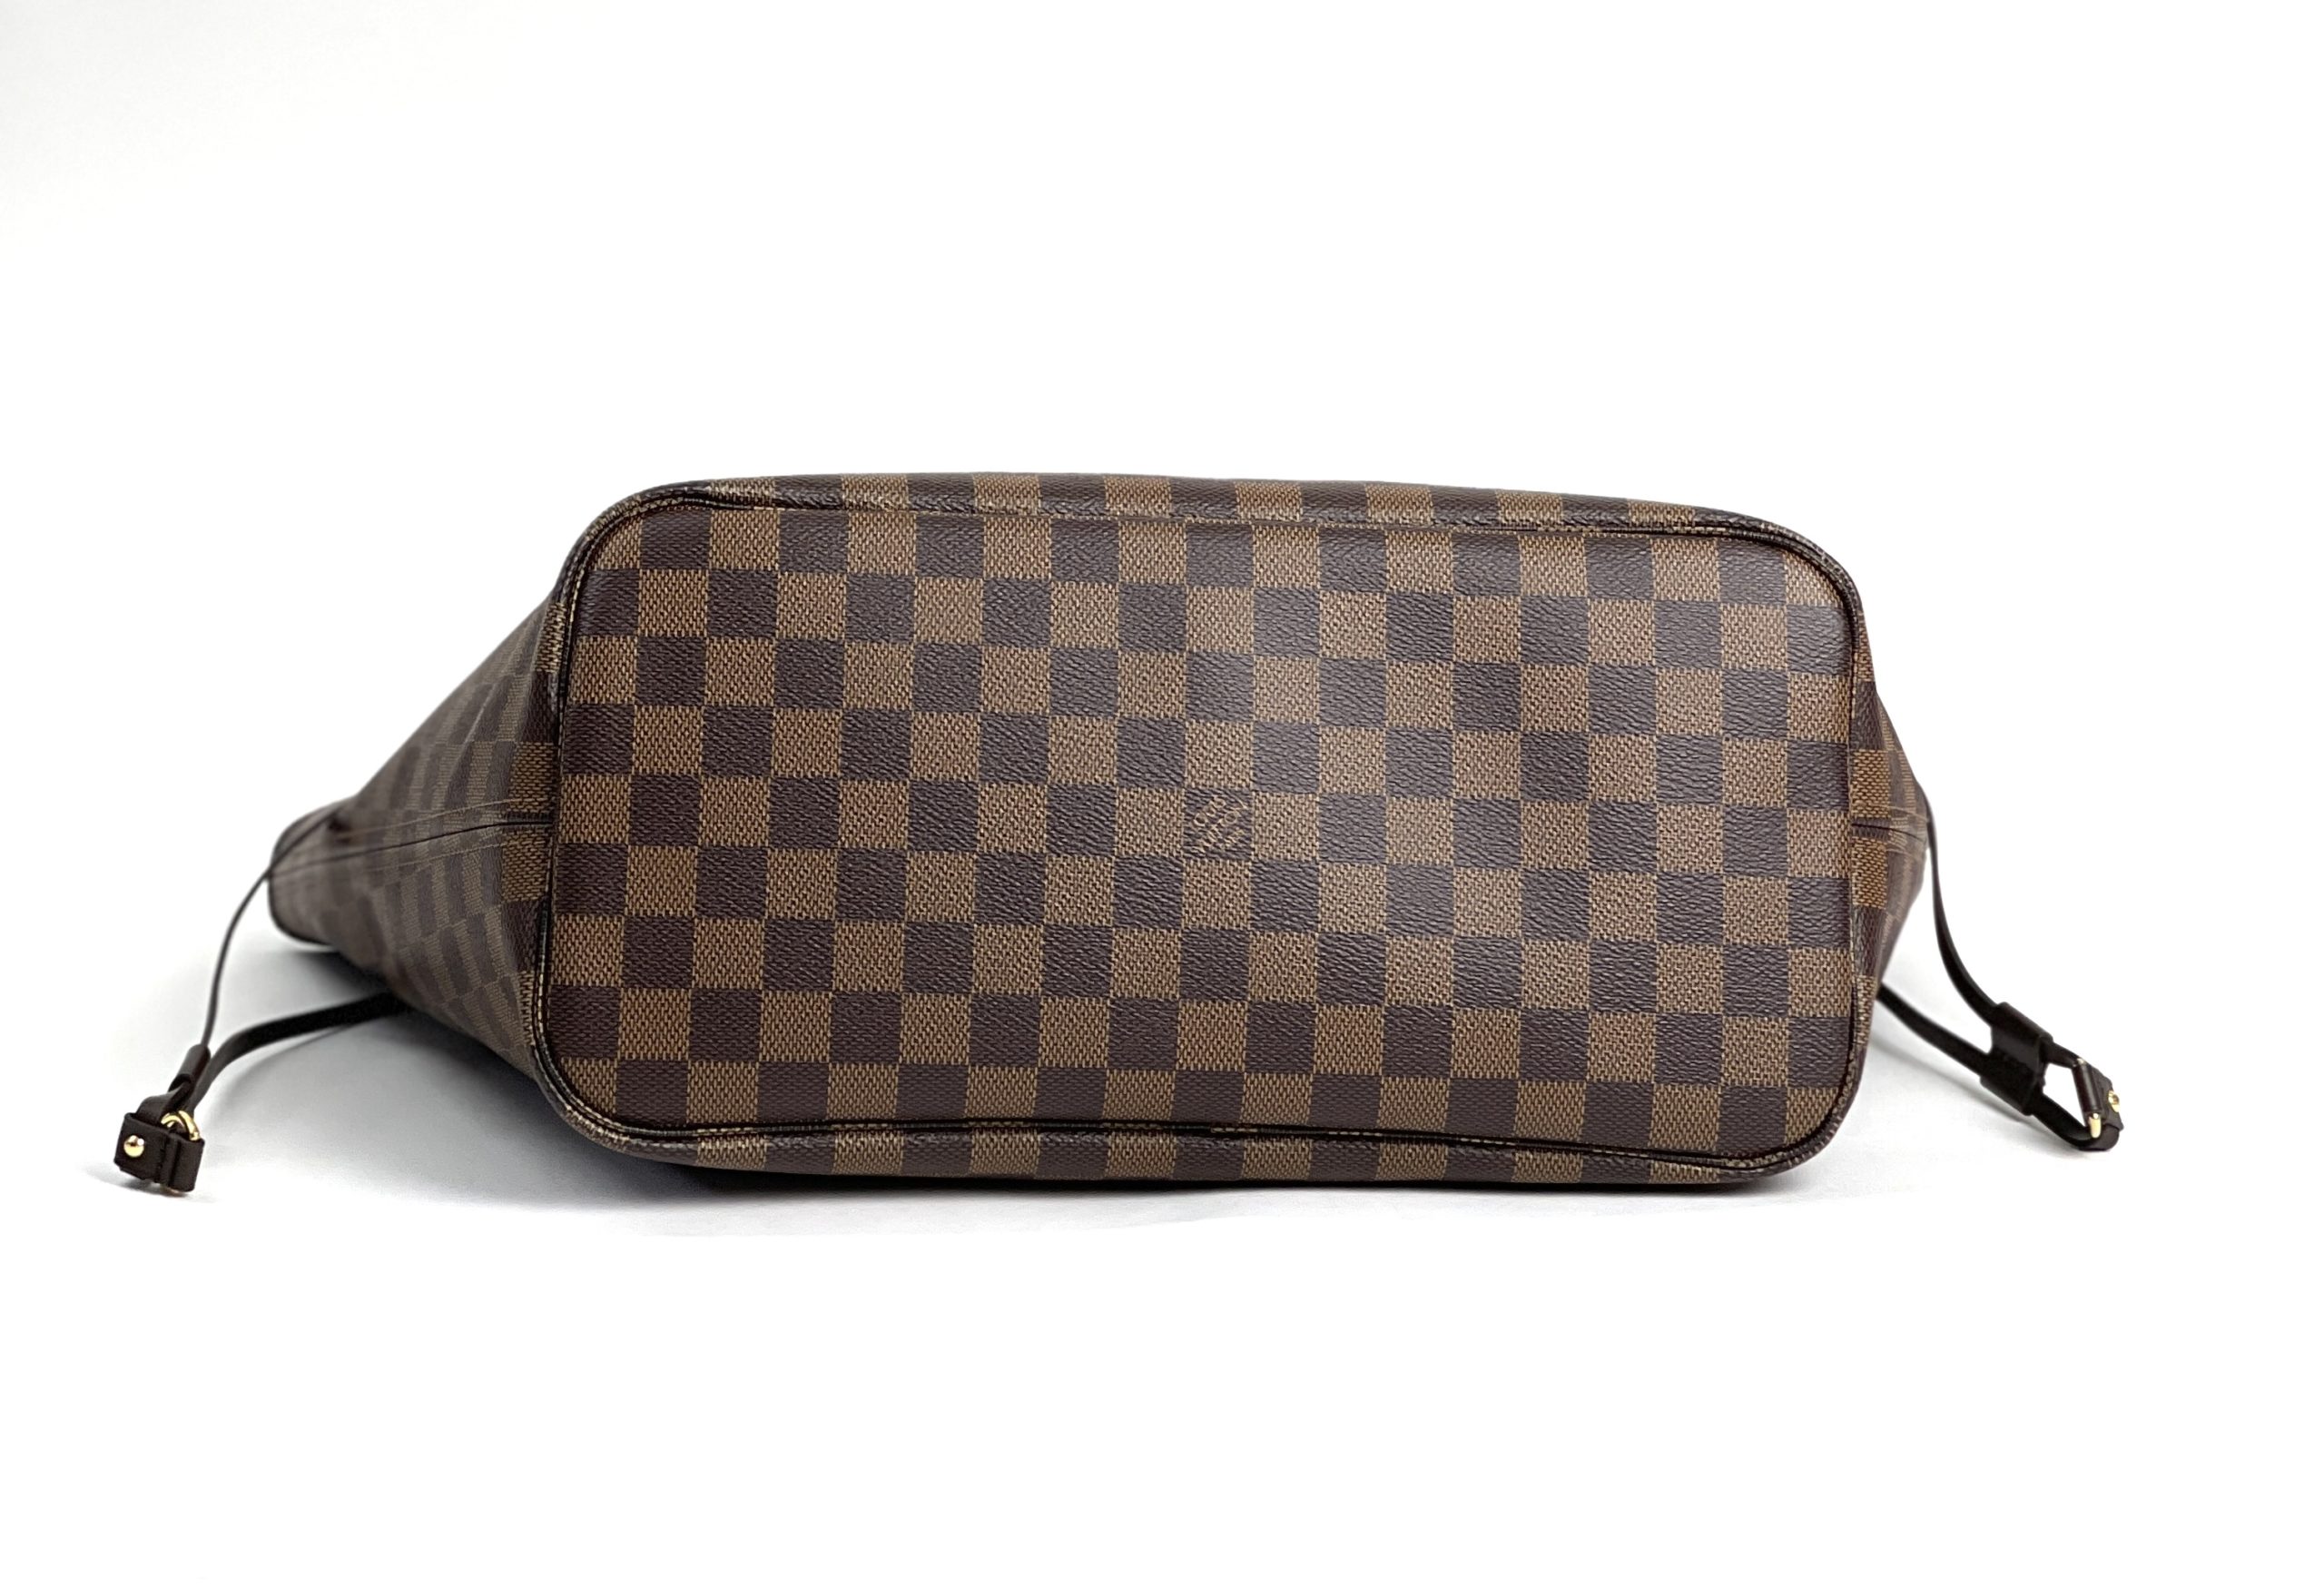 Authenticated Used Louis Vuitton N41358 Neverfull MM Damier Tote Bag Canvas  Women's LOUIS VUITTON 